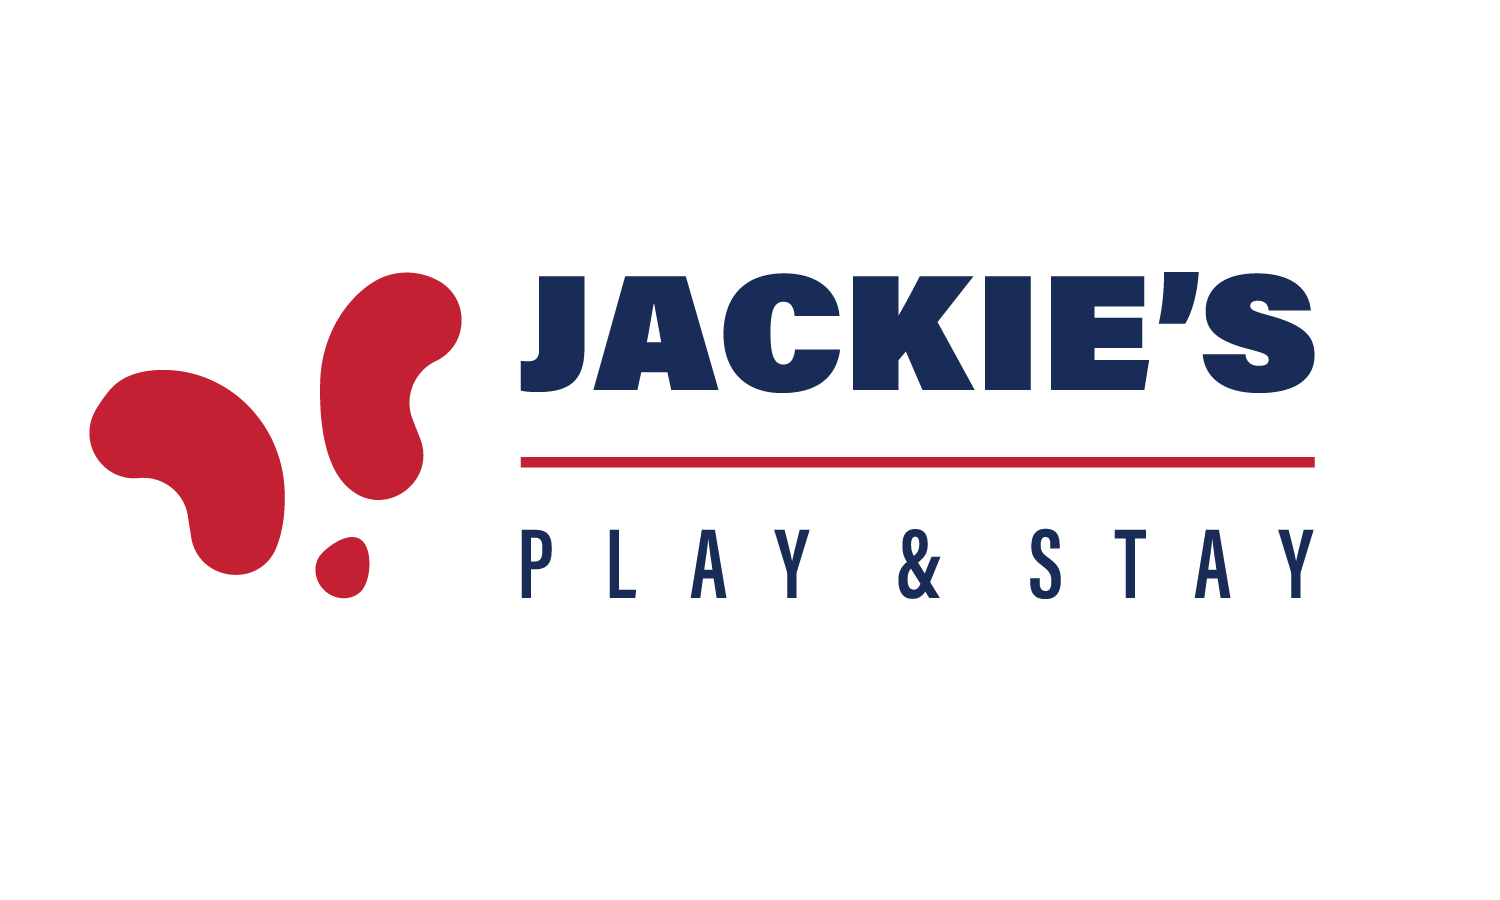 Jackie's Play & Stay